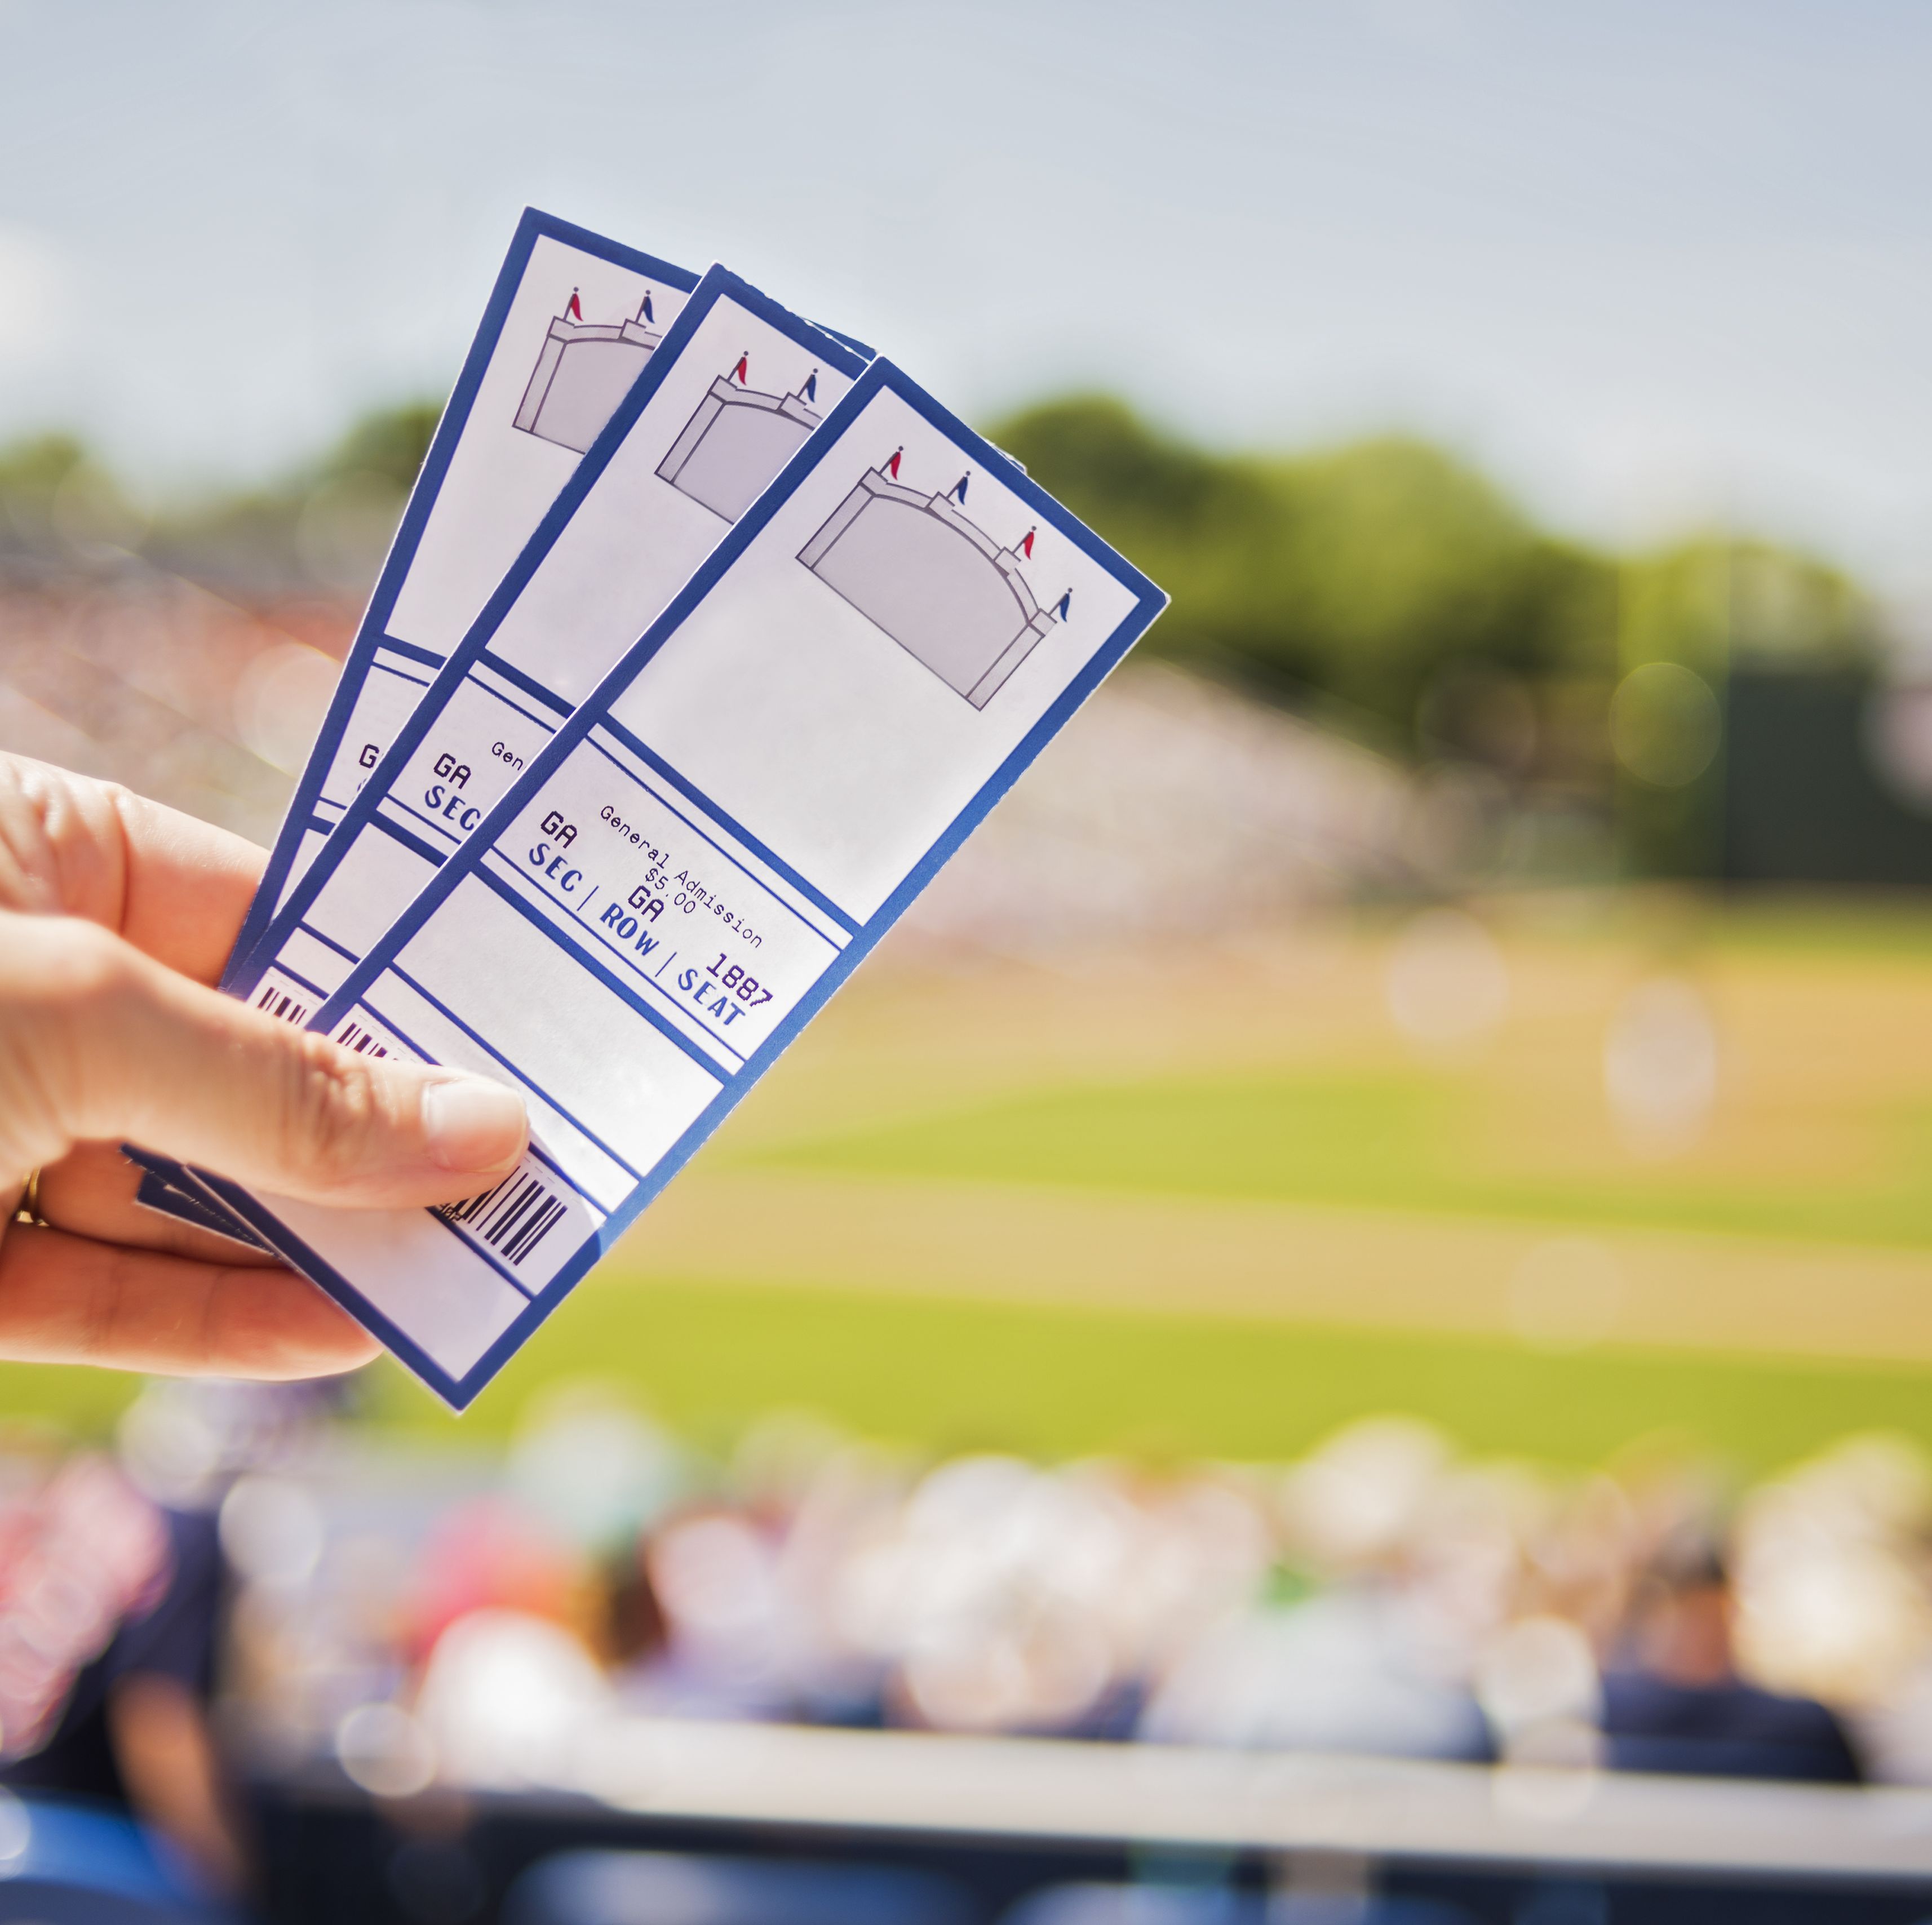 5 Creative Ways to Gift Tickets That'll Get Them Super Excited for the Event